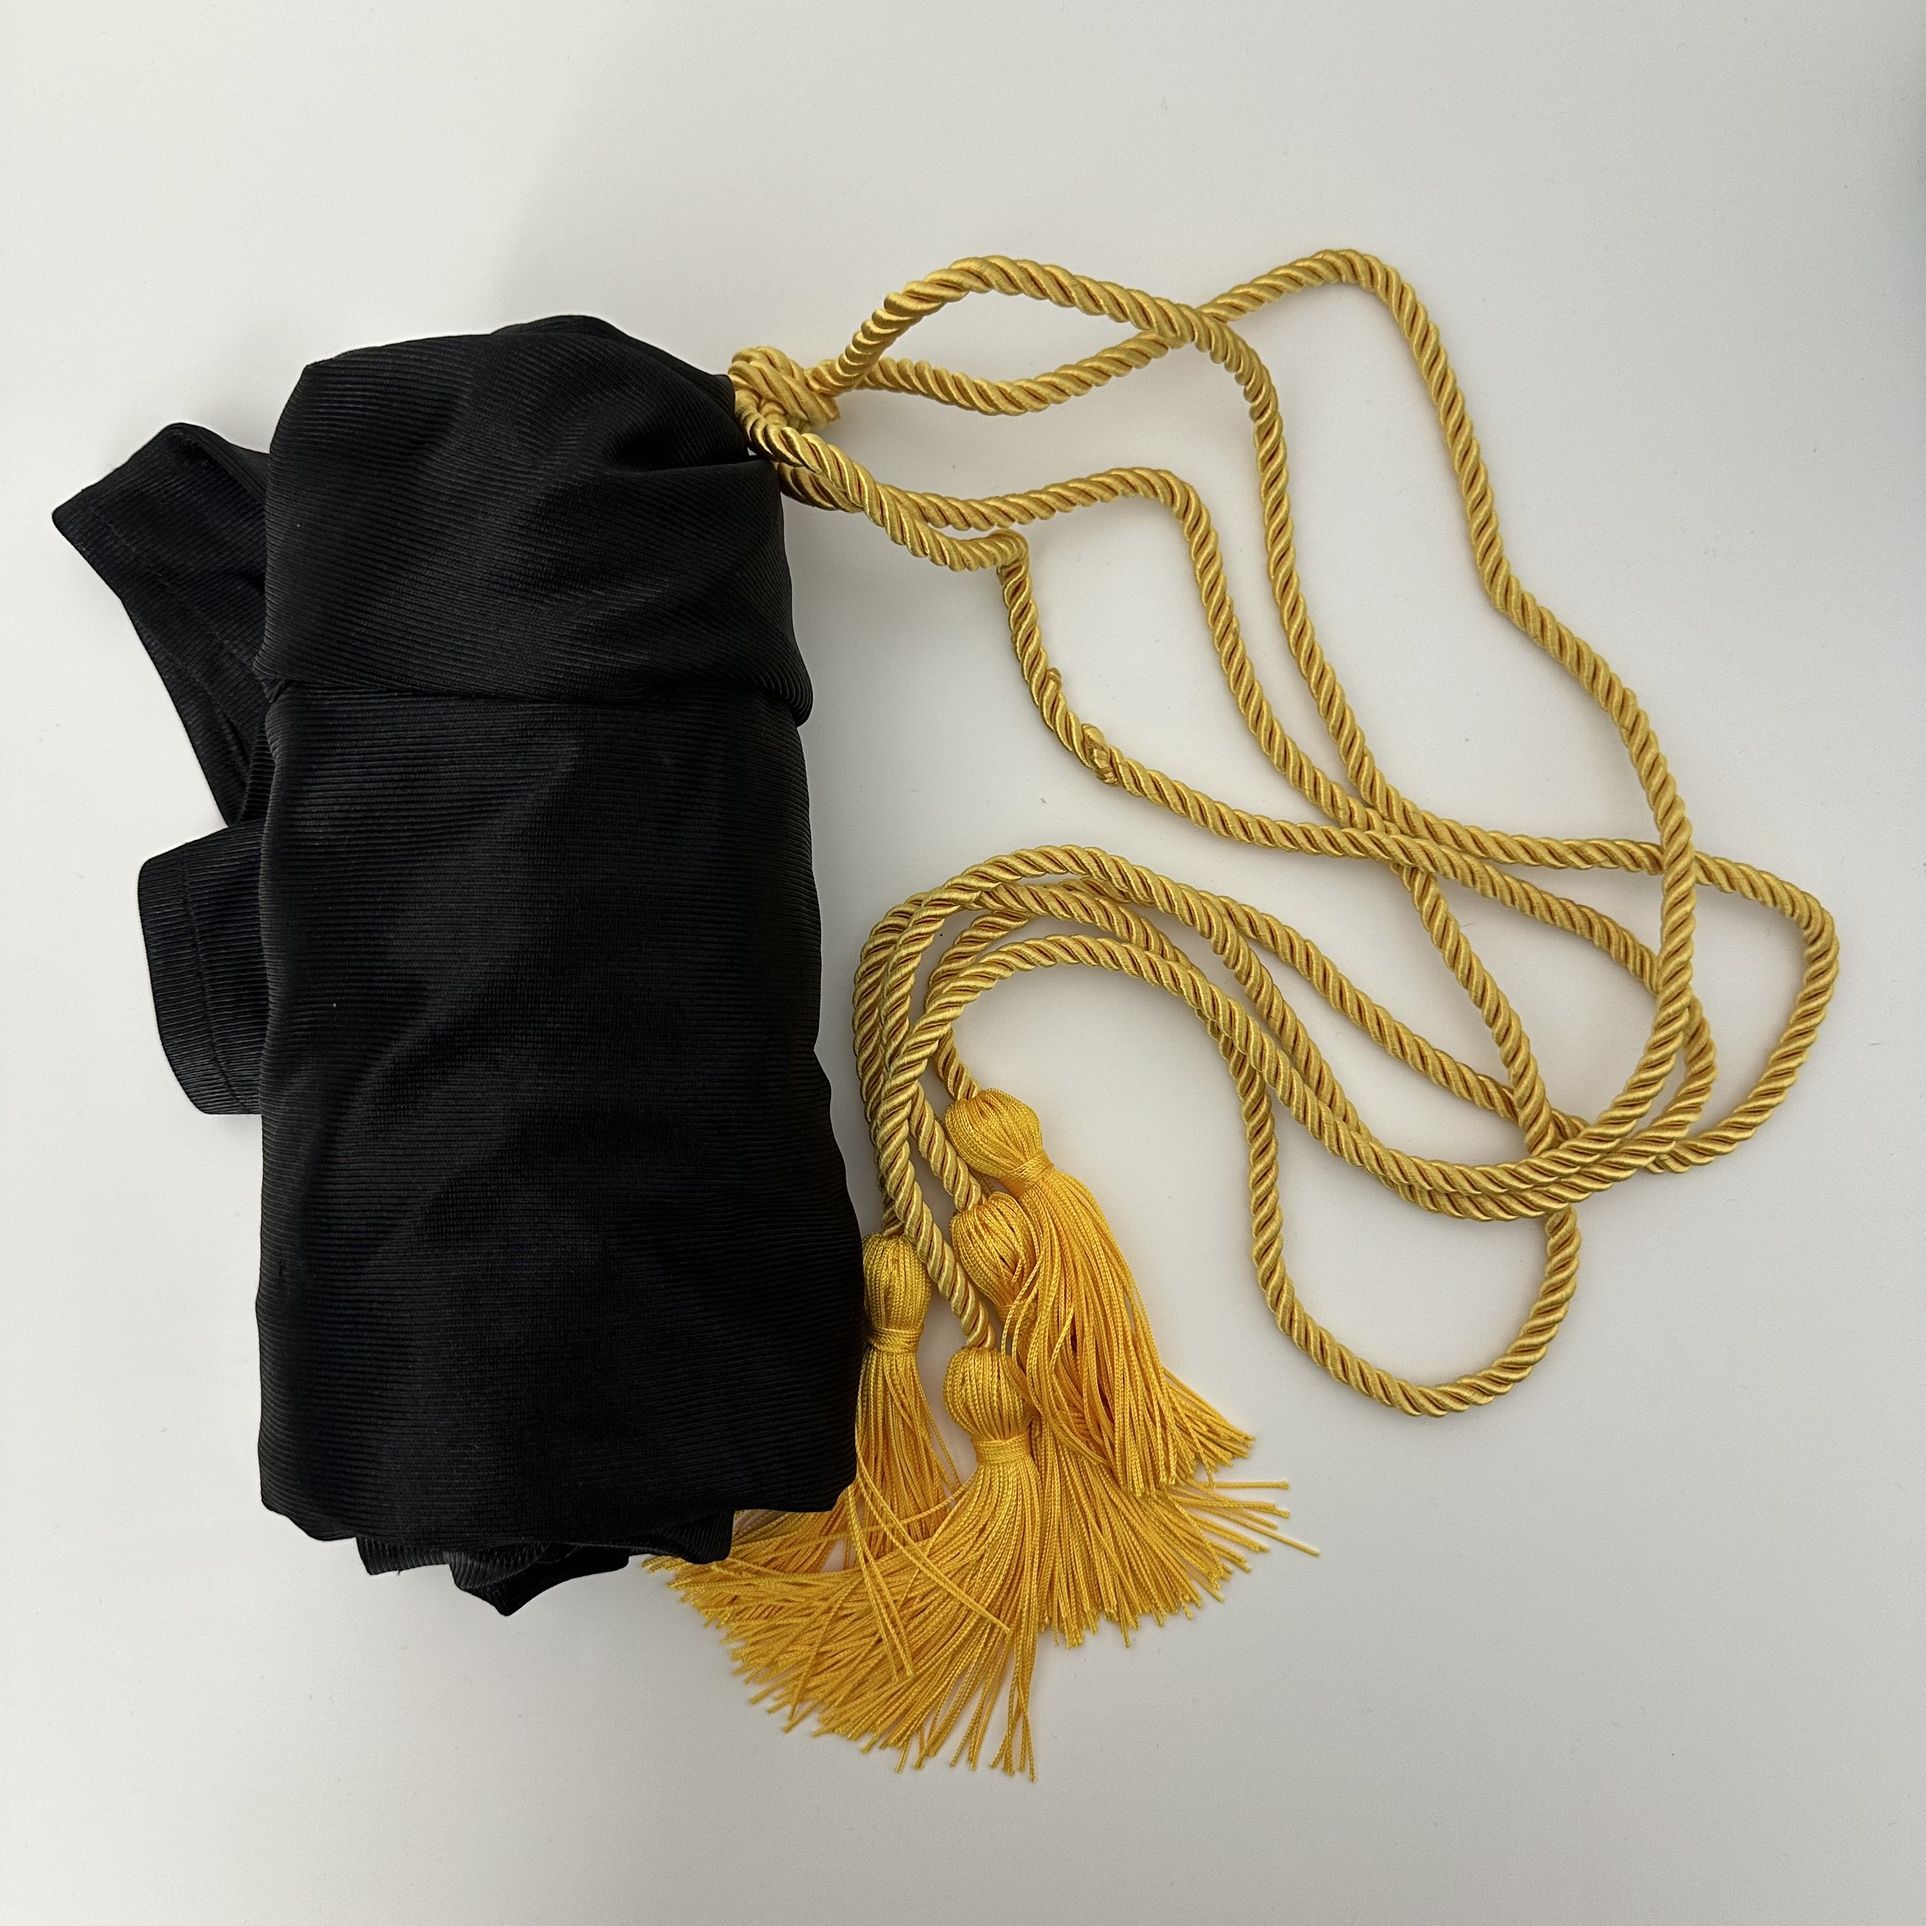 Black Cap Gown and Tassle (doesn’t say graduating year)